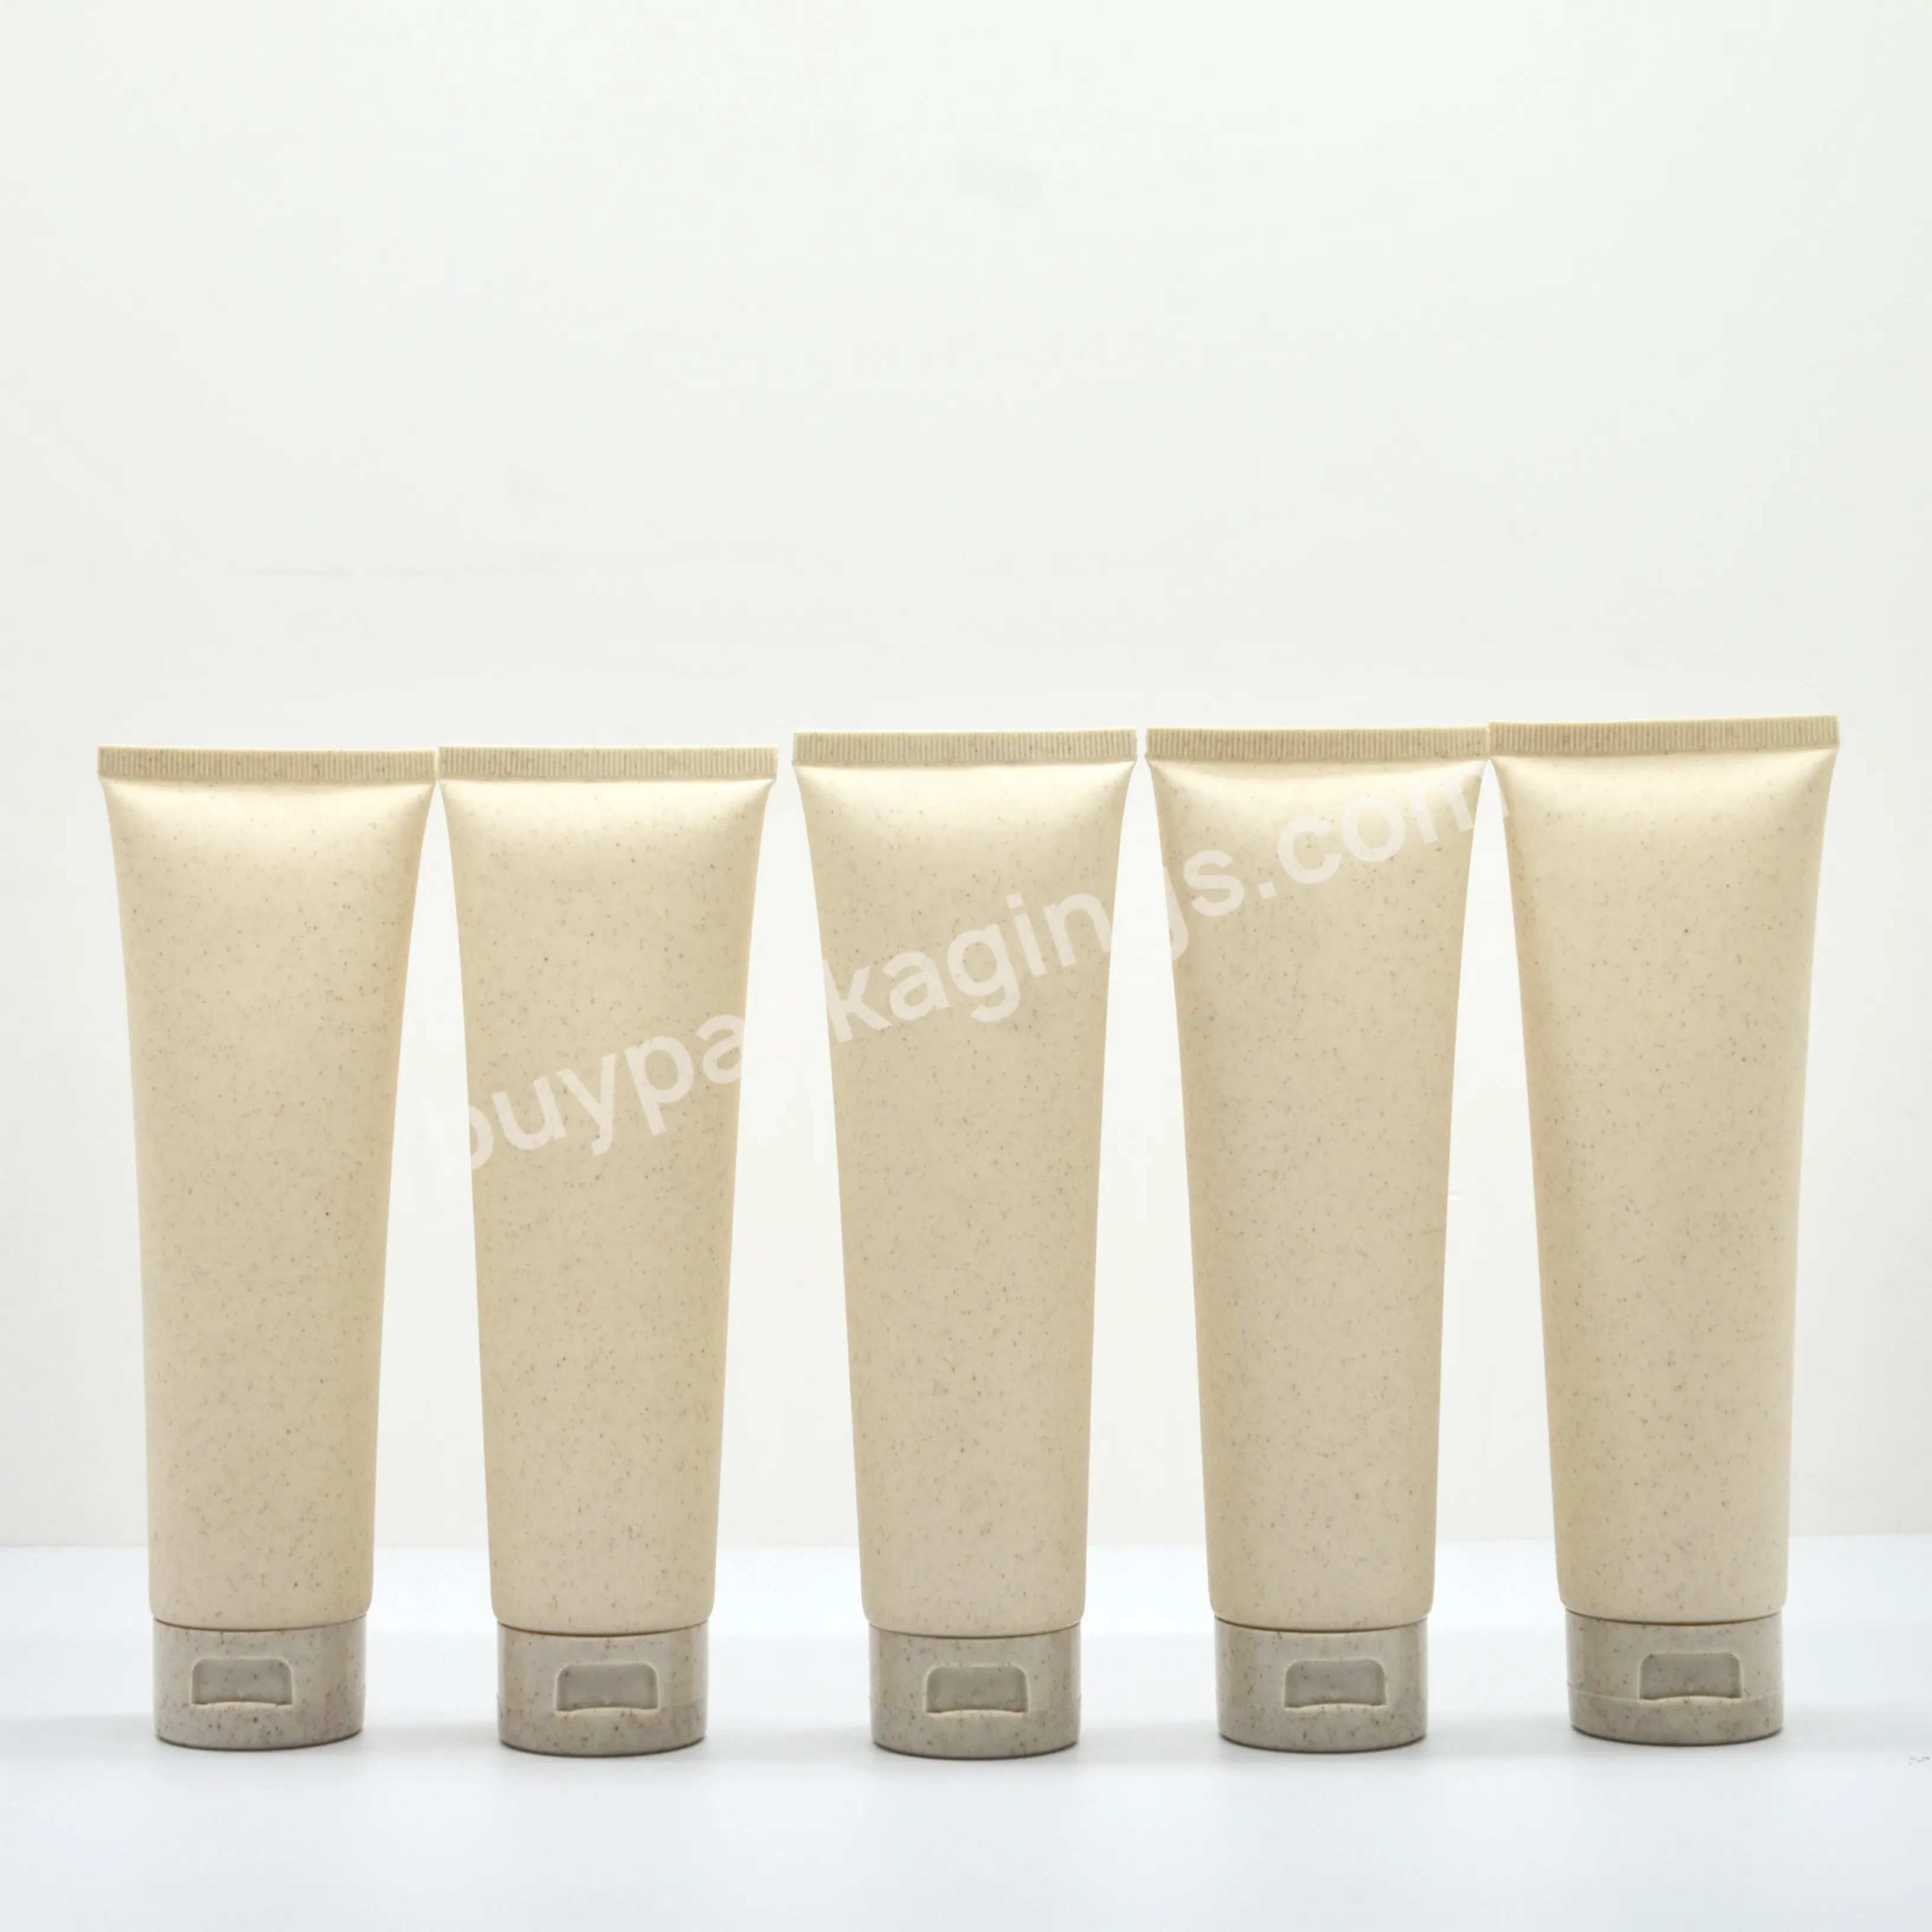 Biodegradable Plastic Facial Cleanser Tube 50ml/100ml/200ml Skin Care Lotion Packaging Wheat Straw Bottles - Buy Eco Friendly Cosmetic Packaging,Biodegradable Plastic Packing,Skin Care Wheat Straw Packing.